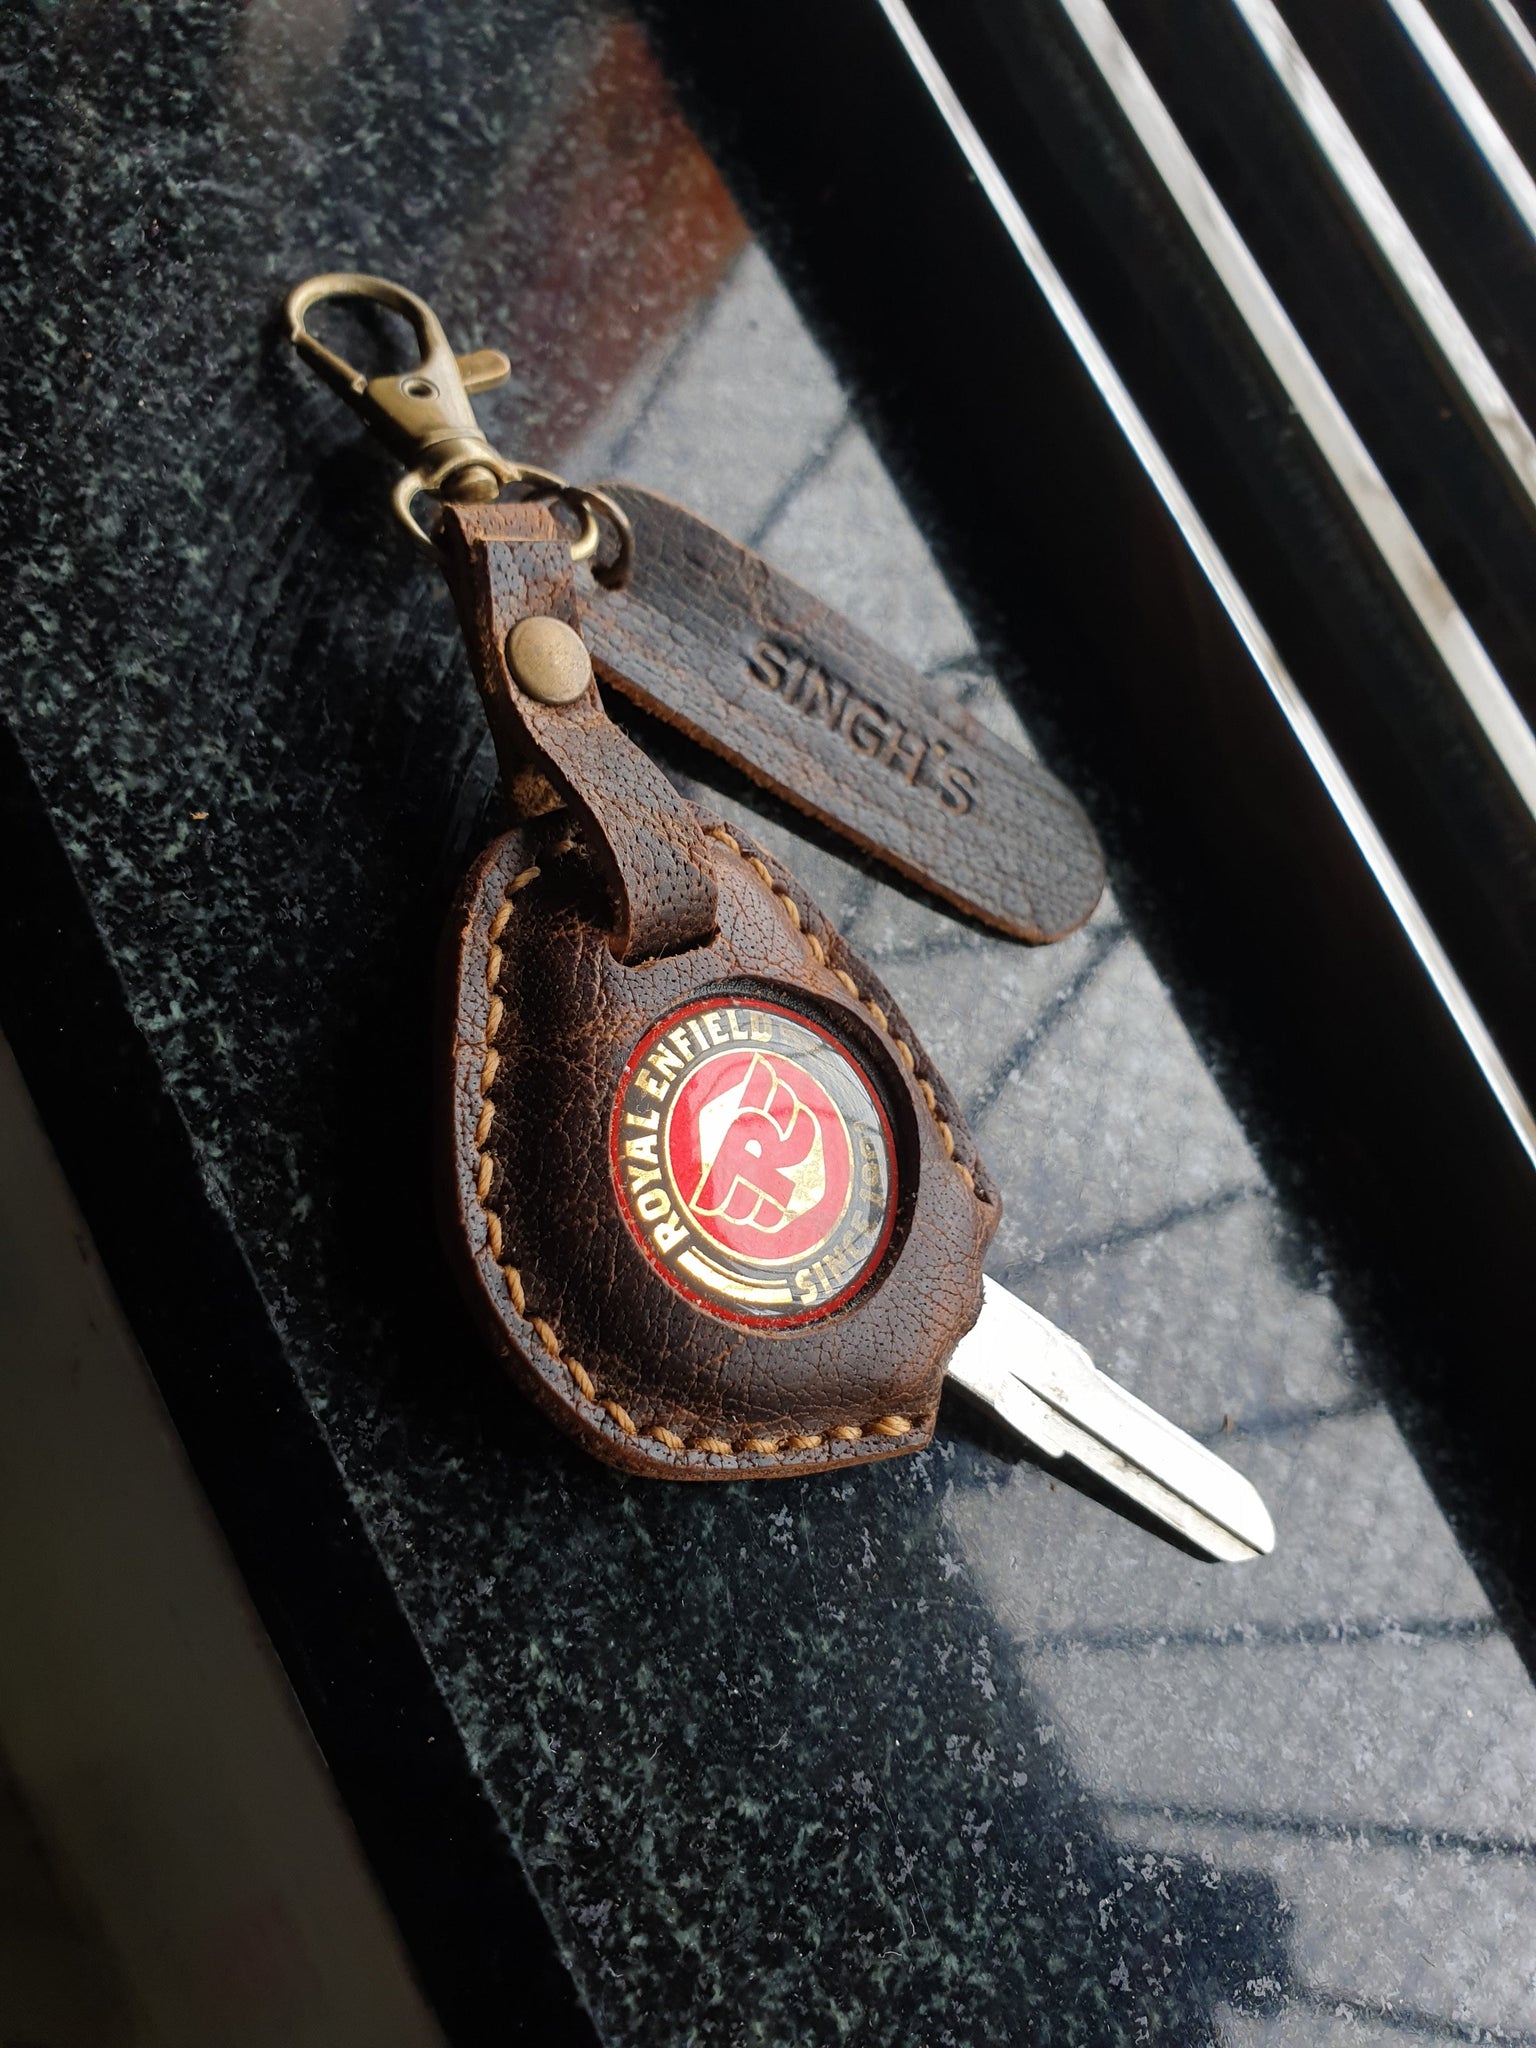 Royal enfield key cover - Indianleathercraft